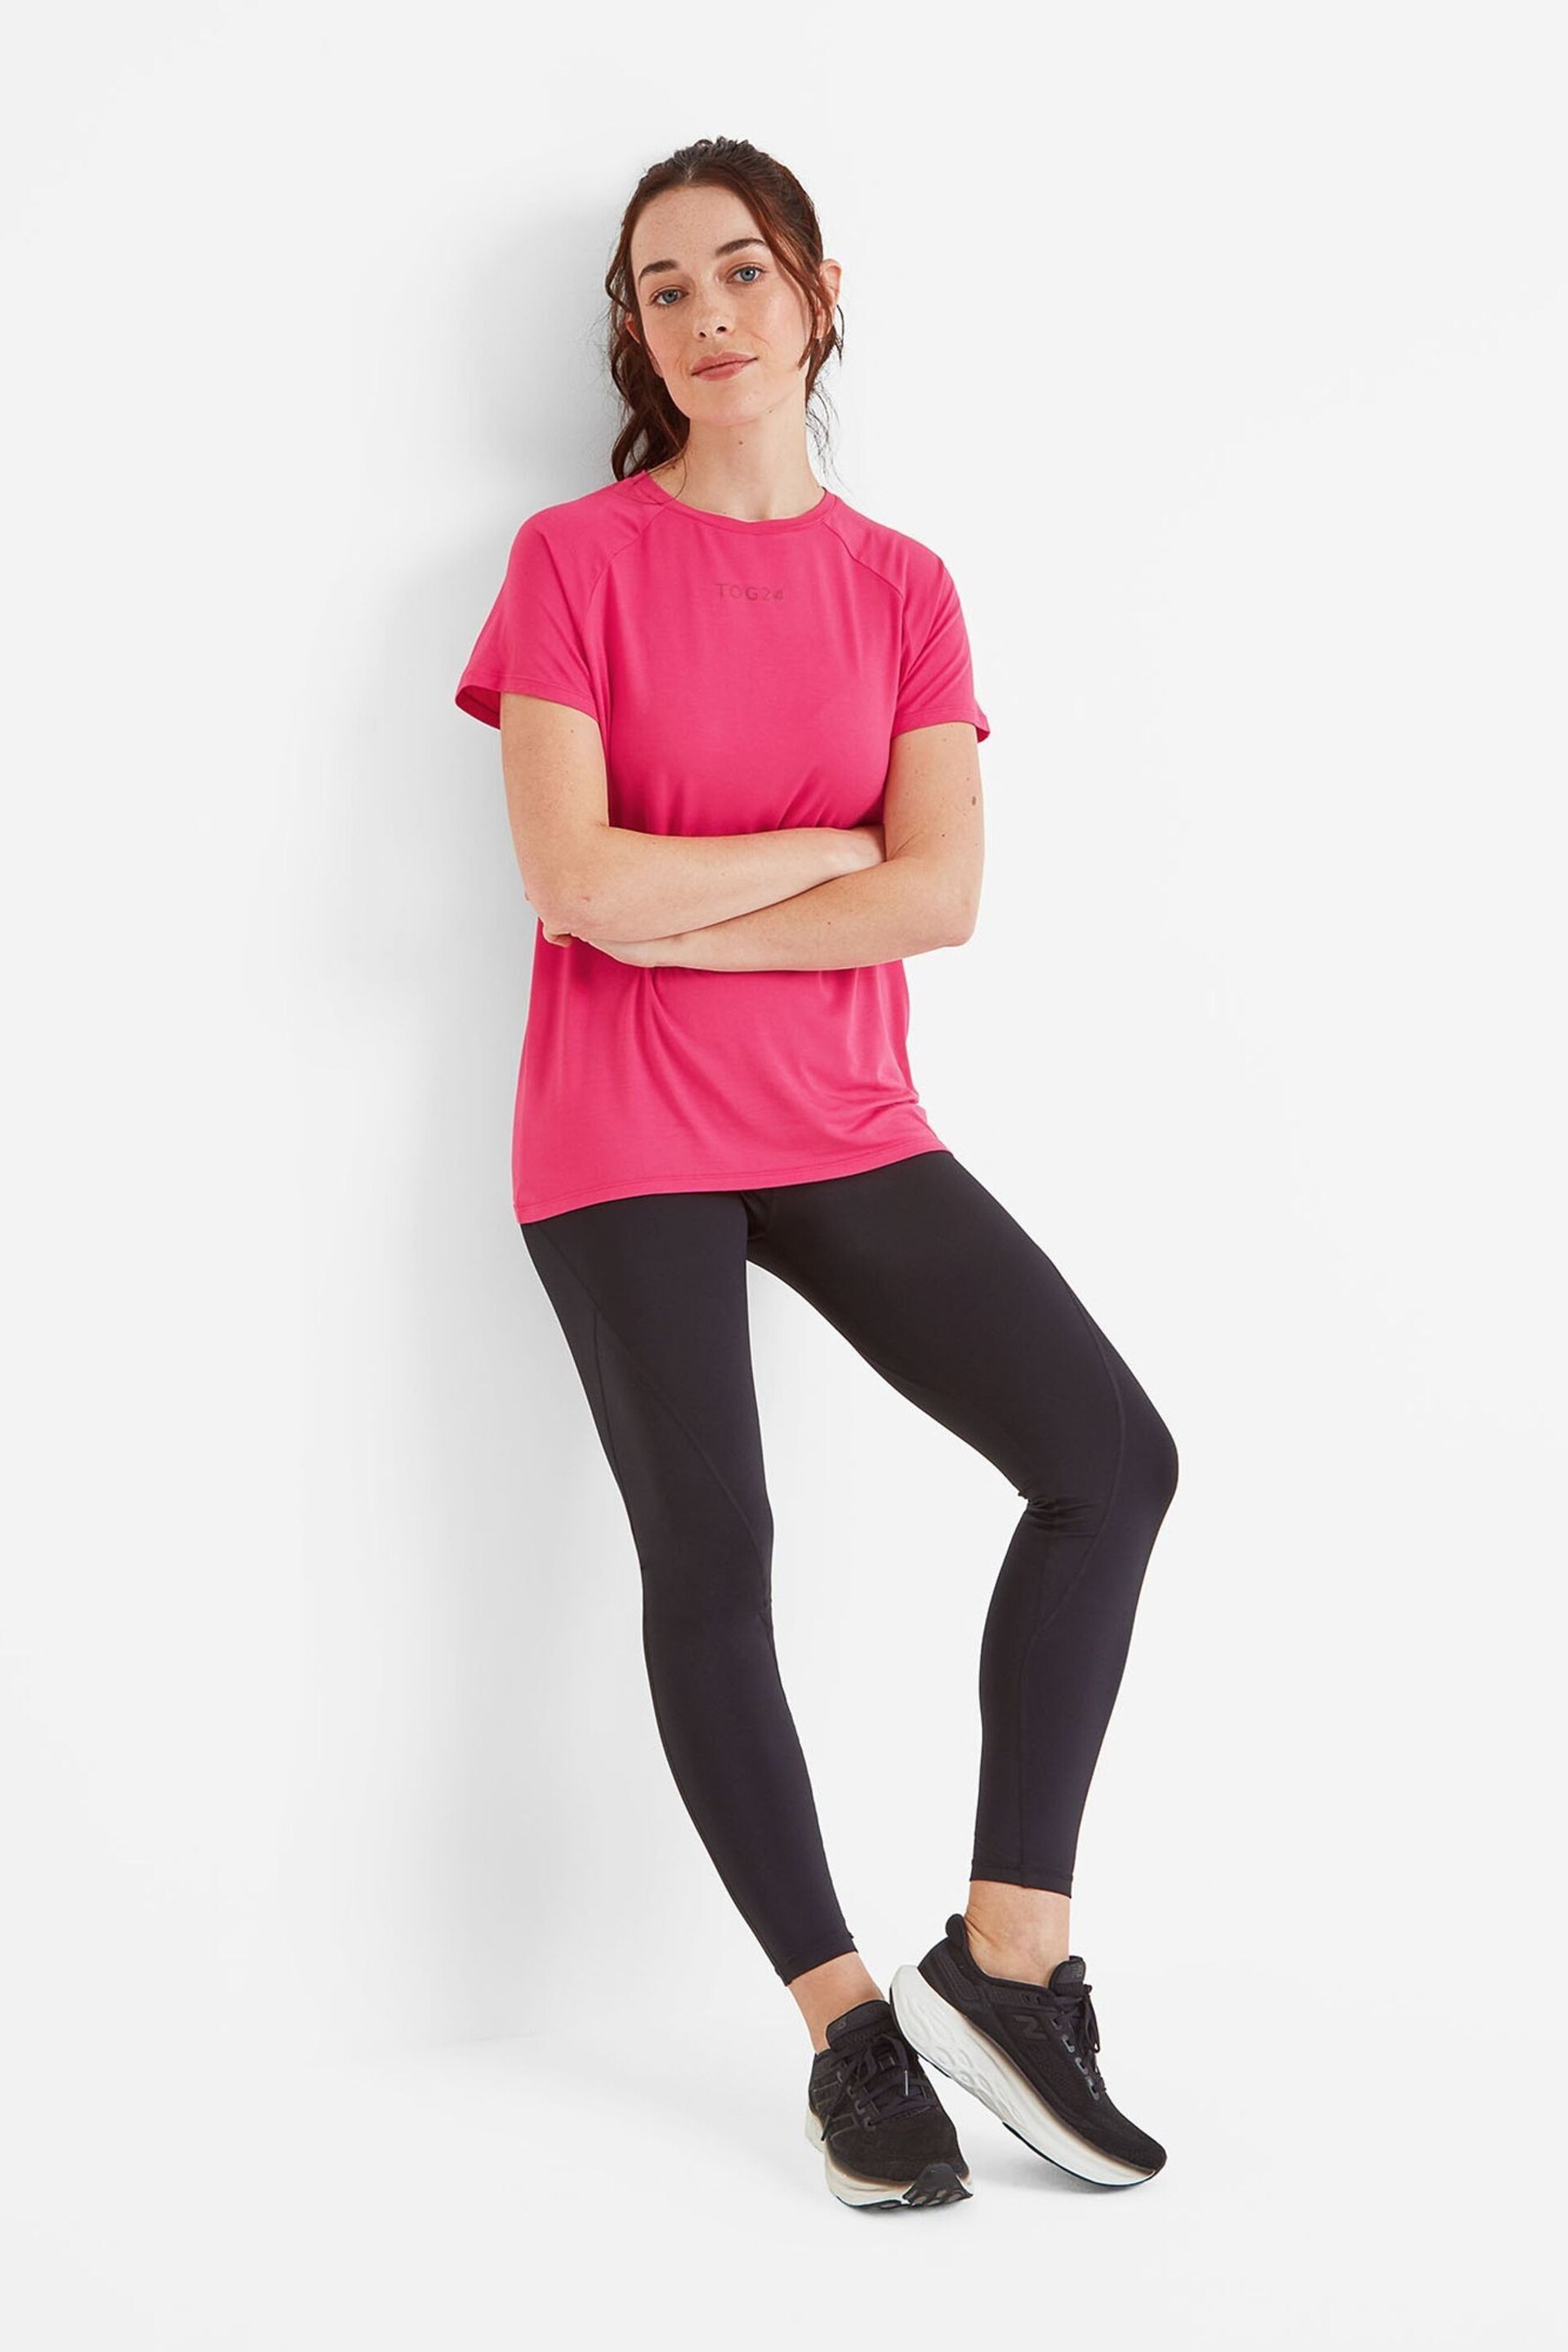 Tog 24 Pink Bethan Sports Top - Image 1 of 5